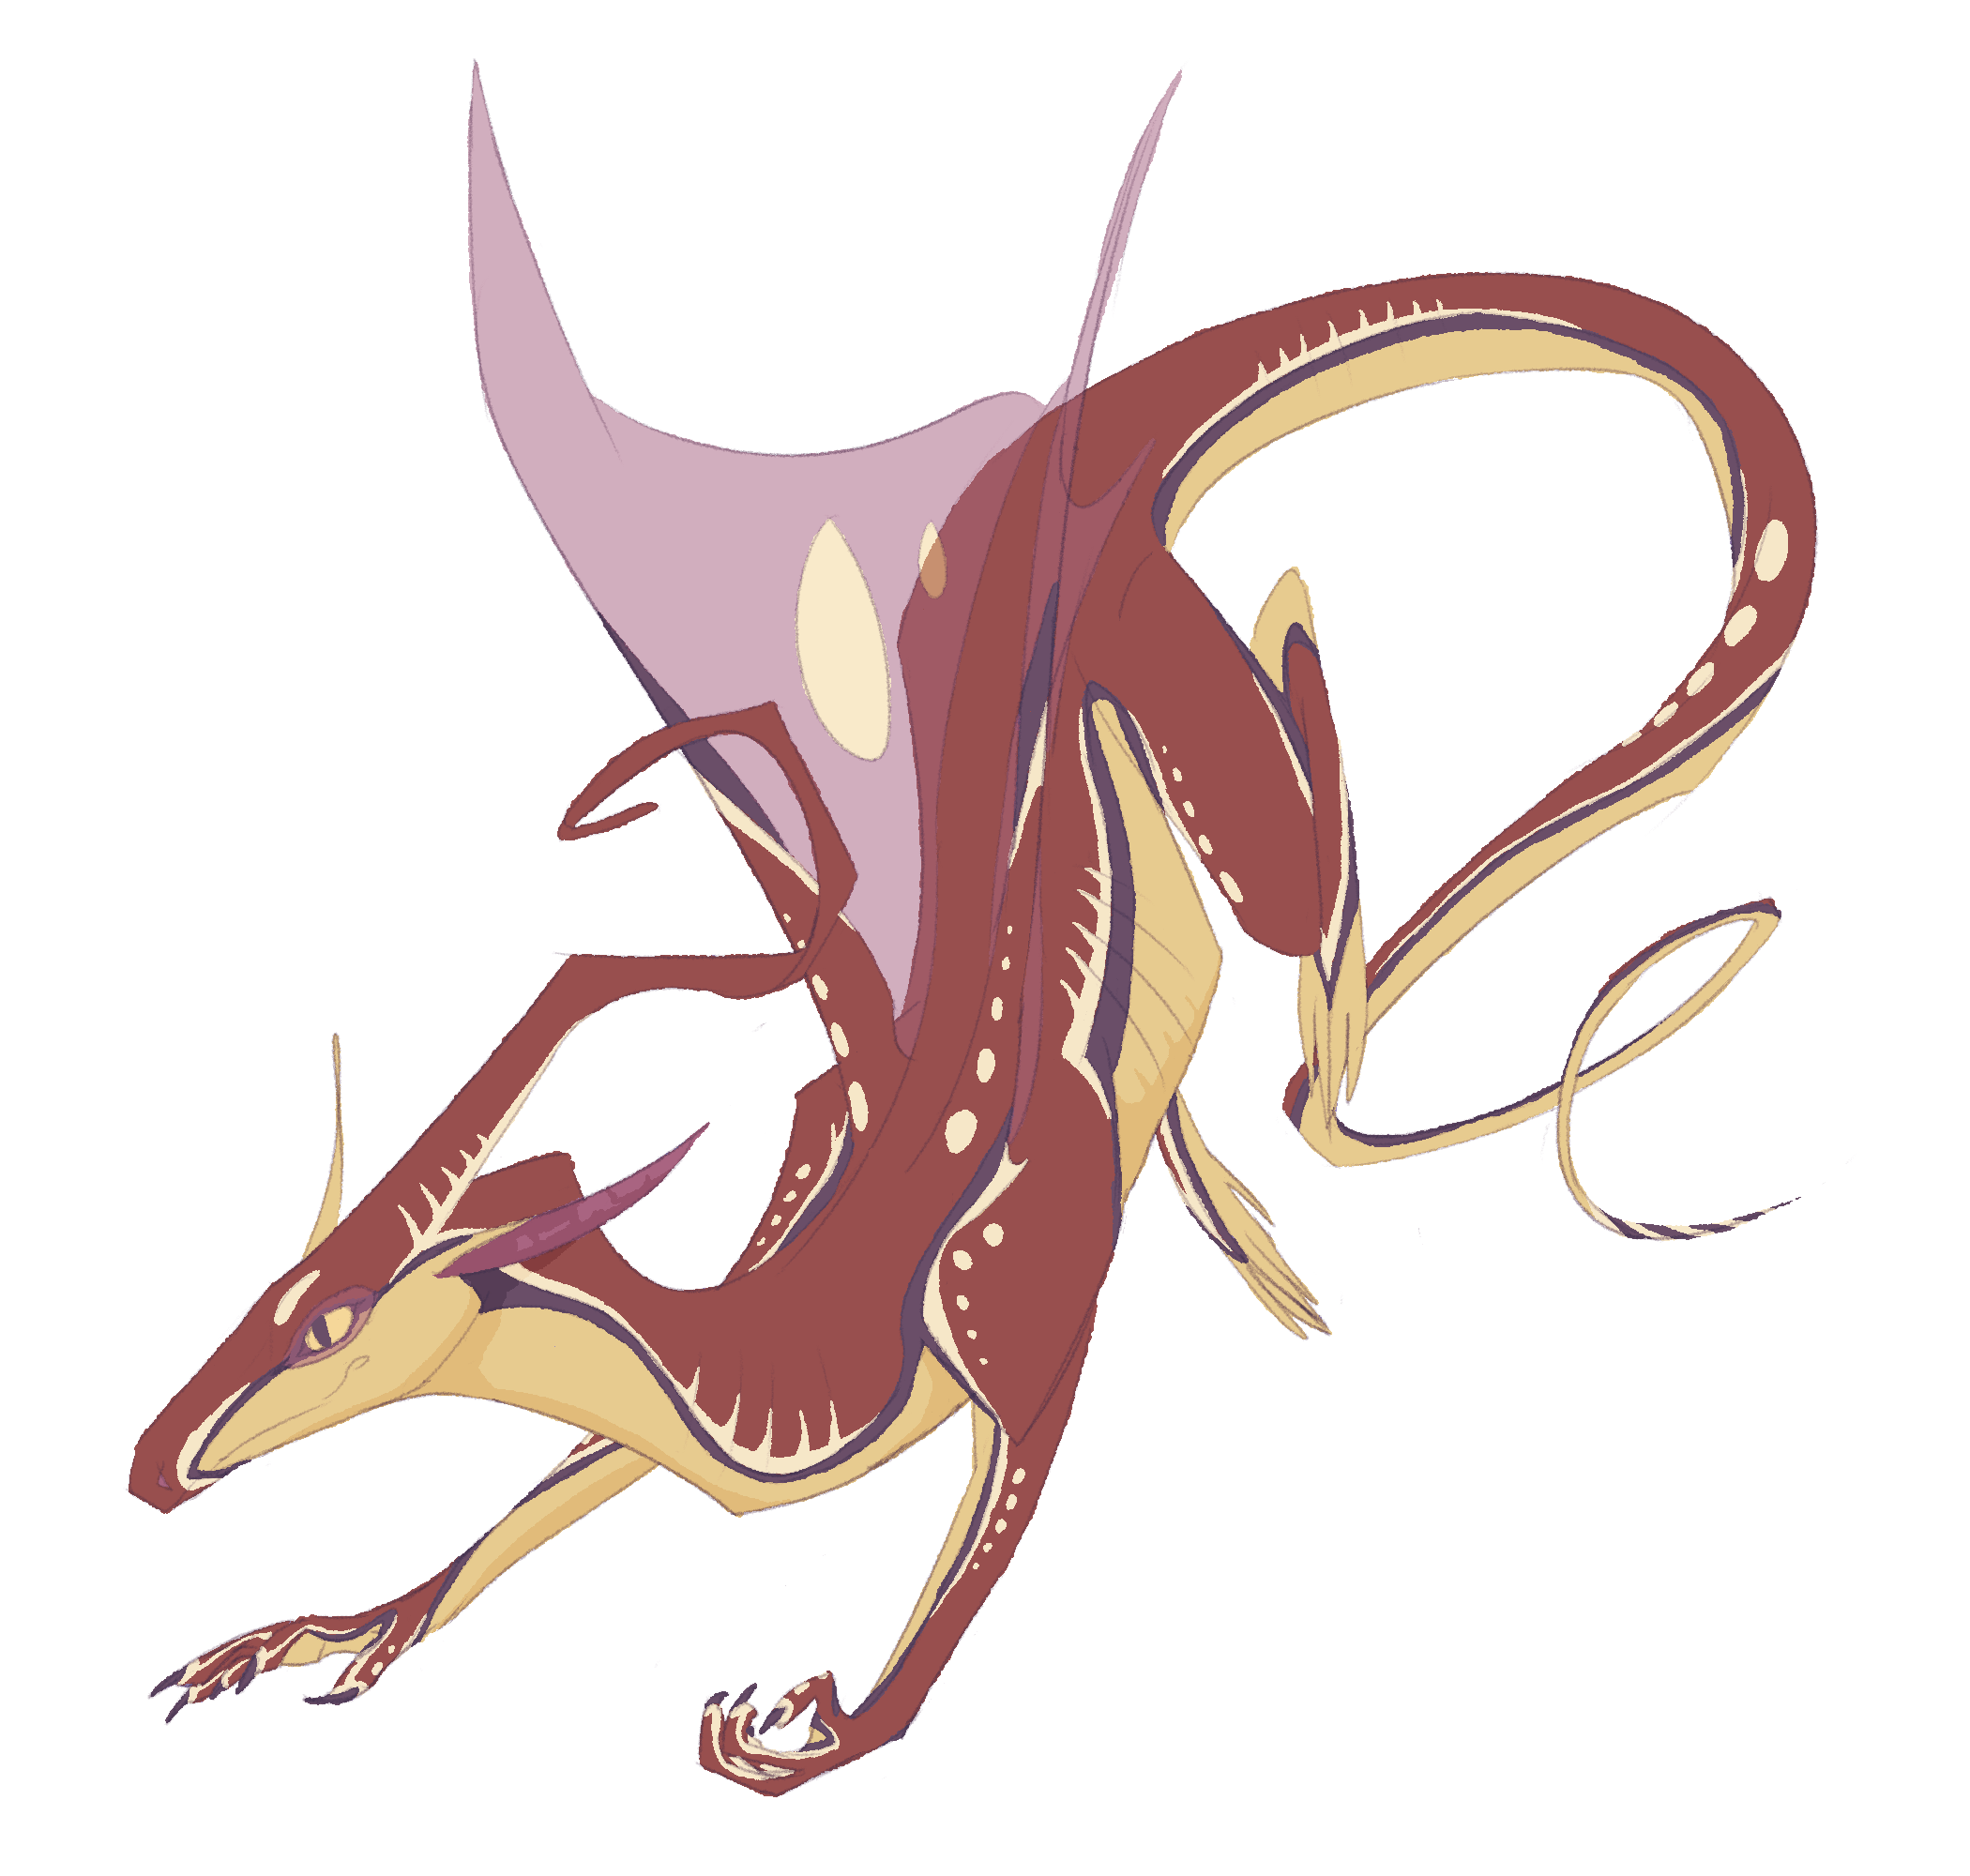 drawing of a slim reddish dragon-like creature with a cream-colored underbelly and a long thin tail. it has a dark purple-ish contour line running between the red and cream parts, which follow the outside of the legs as well. there are also pale white-ish marks adjacent to the dark contour, with spots and rib-like patterns breaking up the flow on the red side. it's wings are transparent red with two yellow eyespots. it appears to be somewhere between a jumping and running position, with a vaguely s-like curved shape.